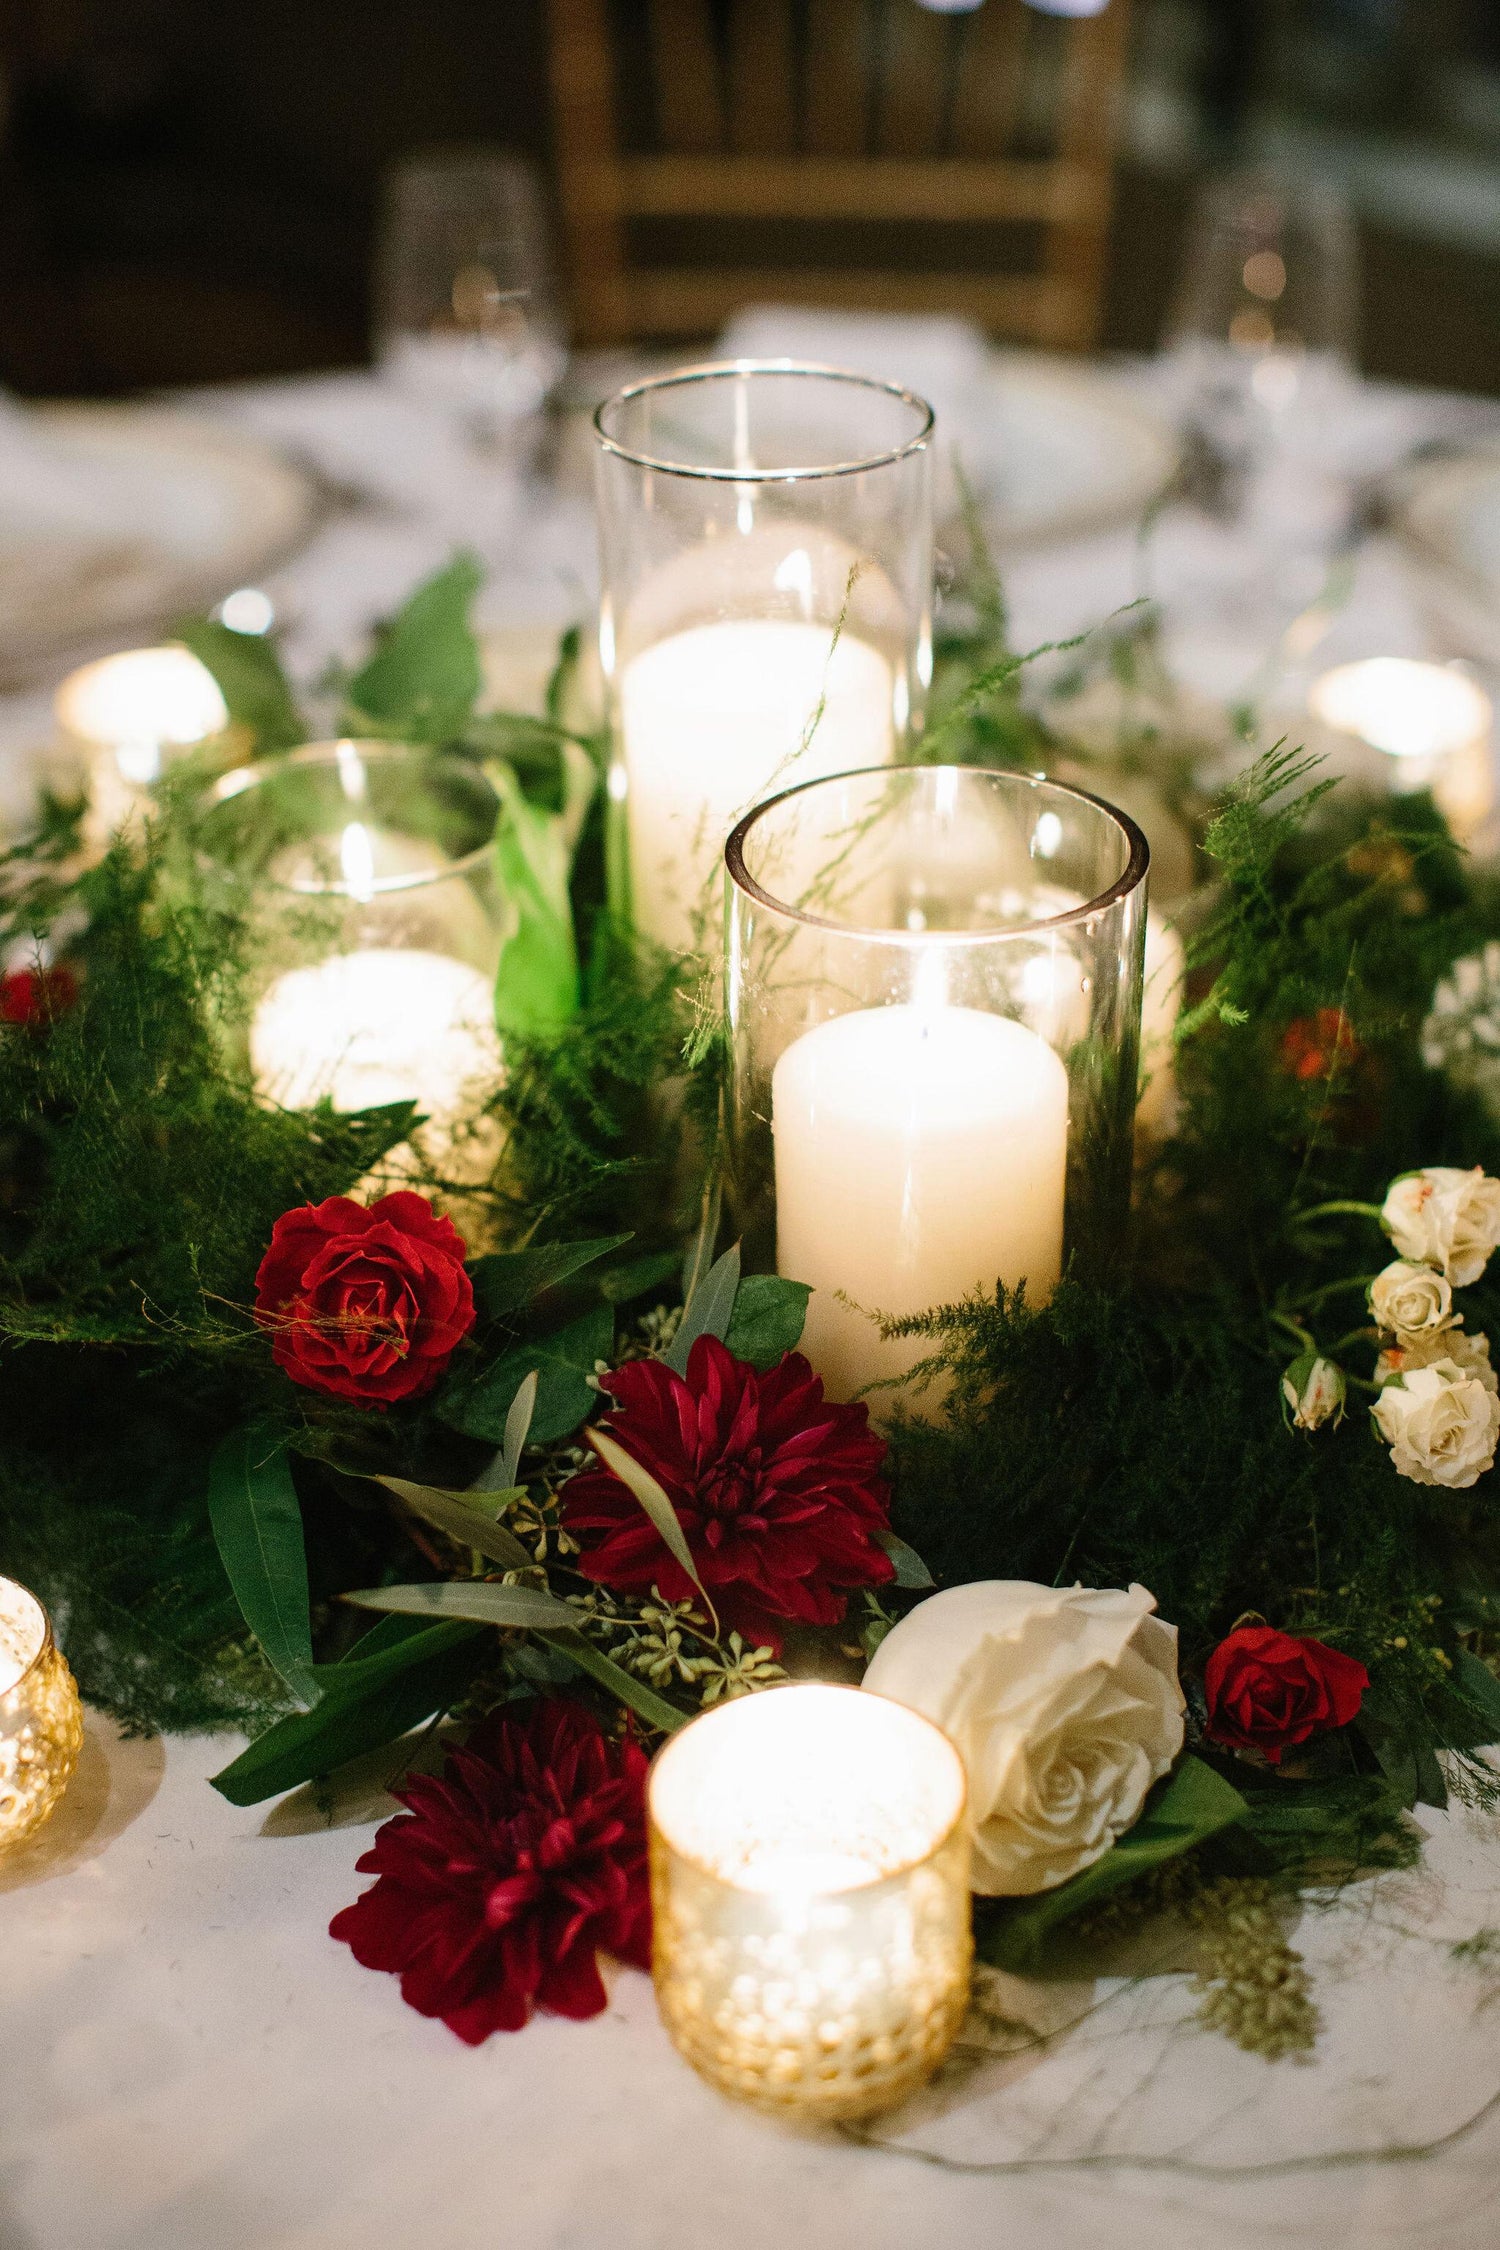 Wintry and Wonderful, a Wedding at the University Club of Chicago